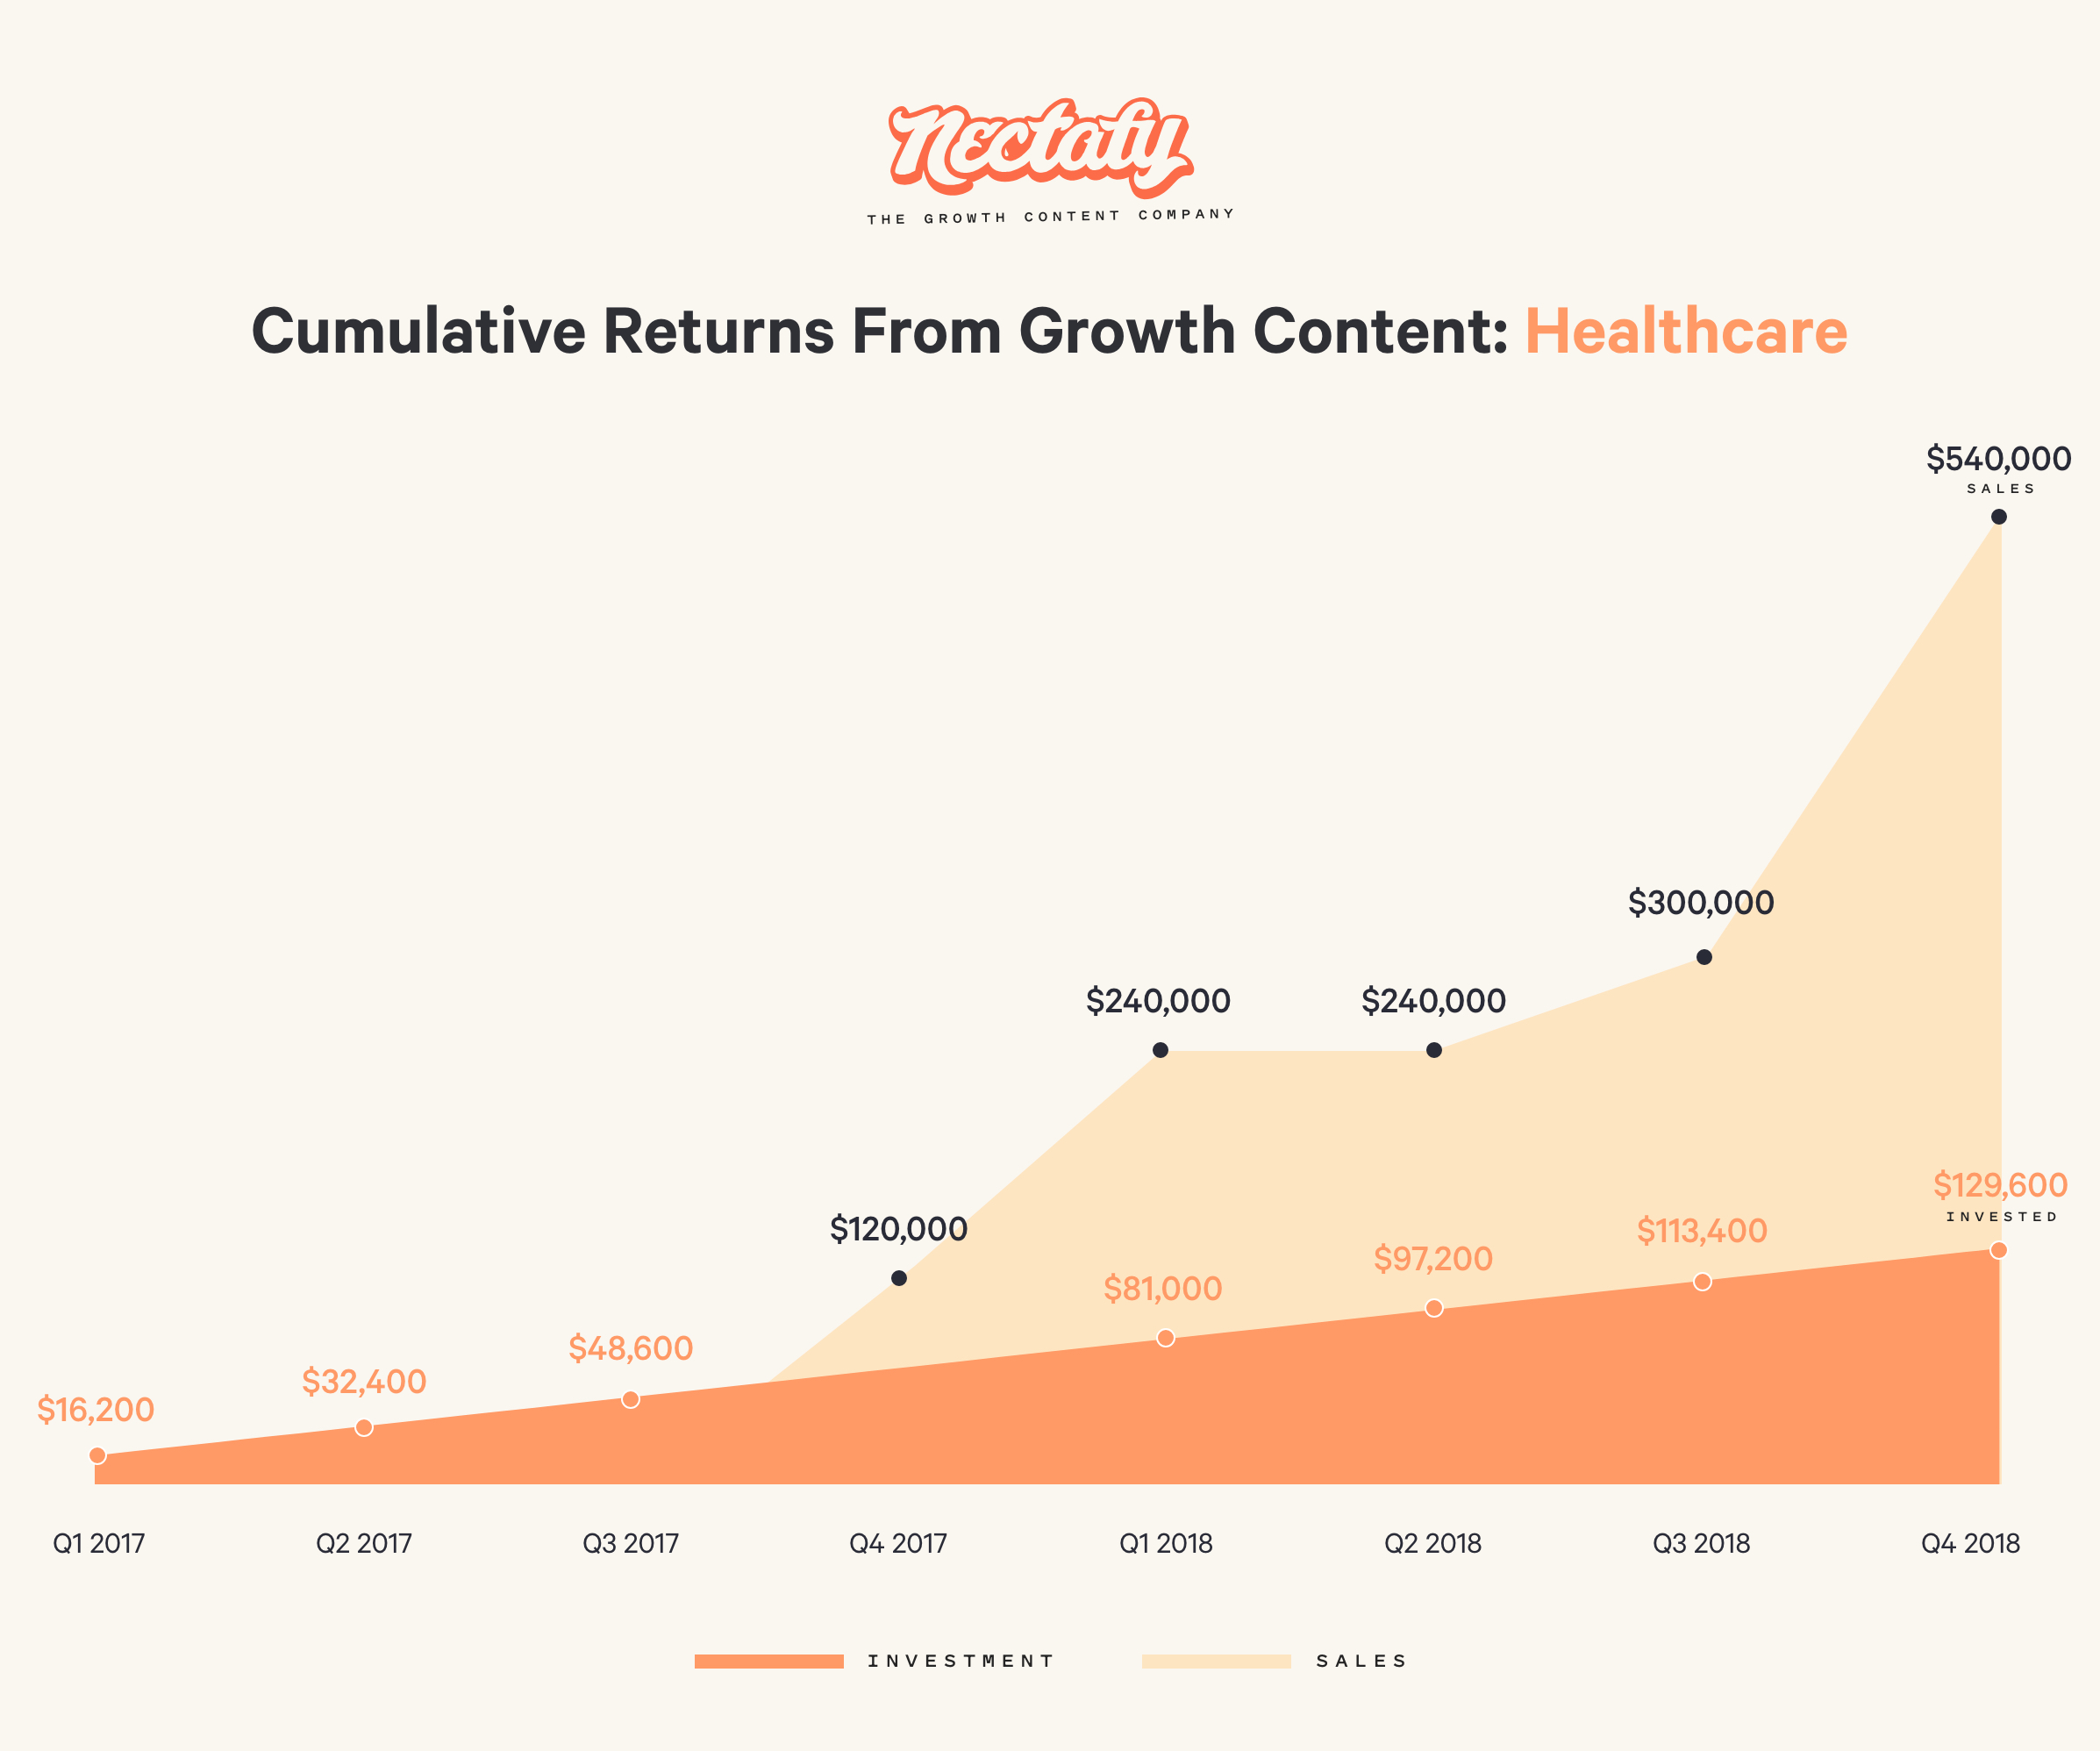 Cumulative returns from growth content - Healthcare